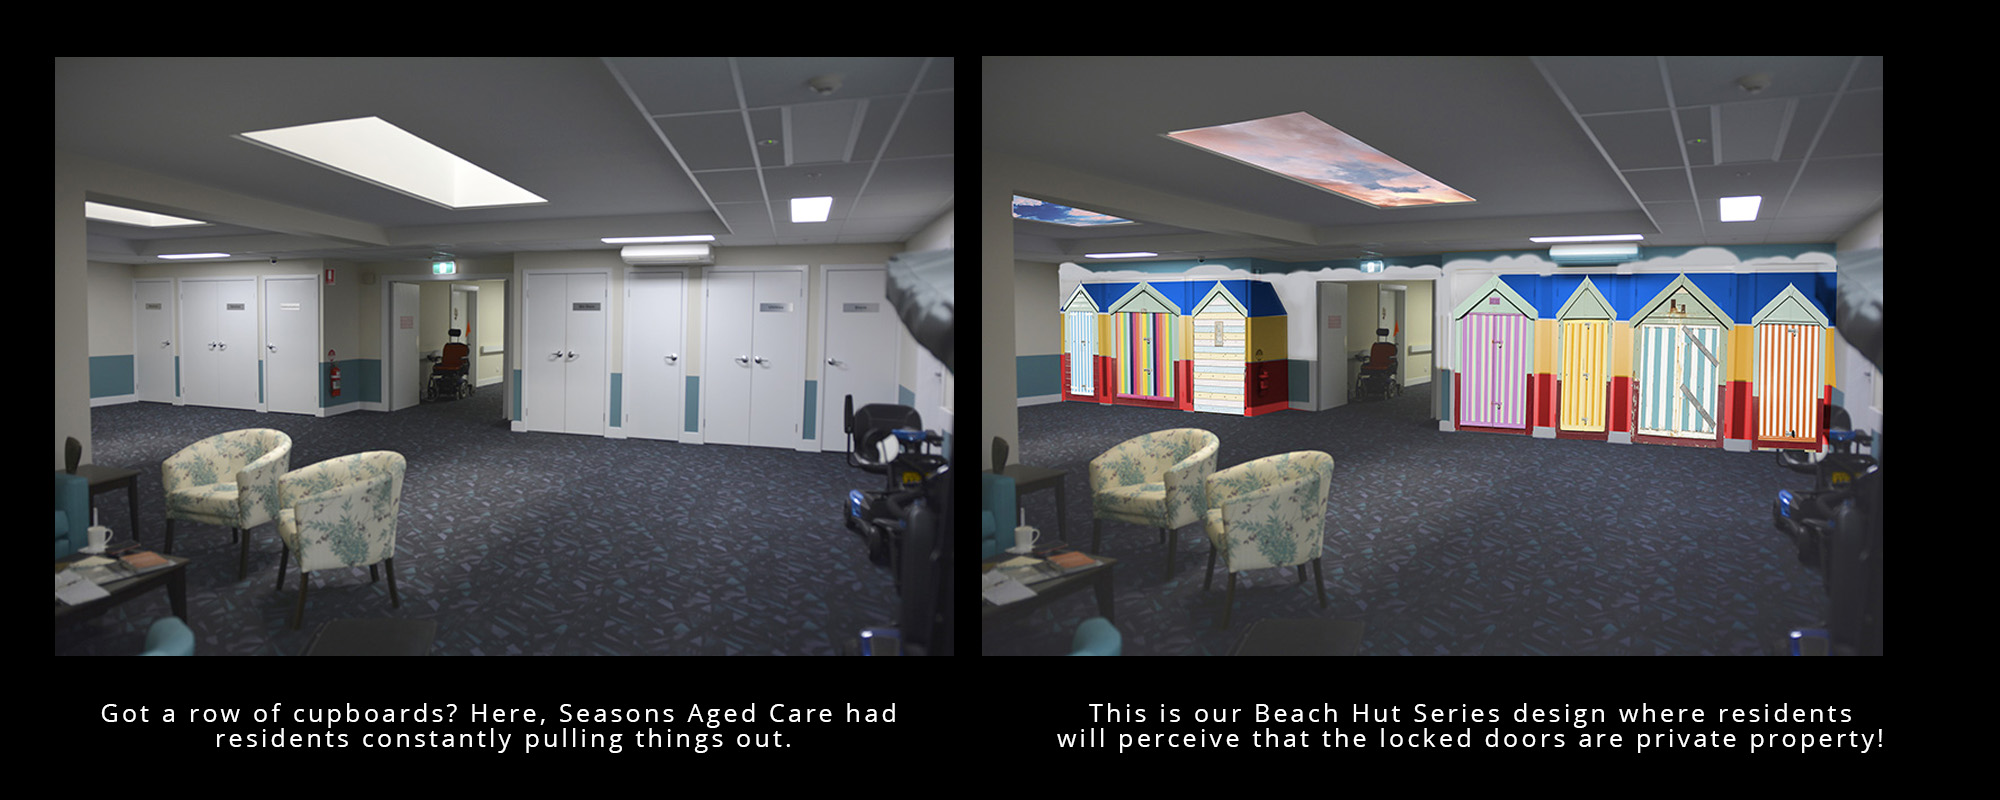 Cupboard diversion decorations- The Beach Hut Series designed for Seasons Aged Care by The Mural Shop